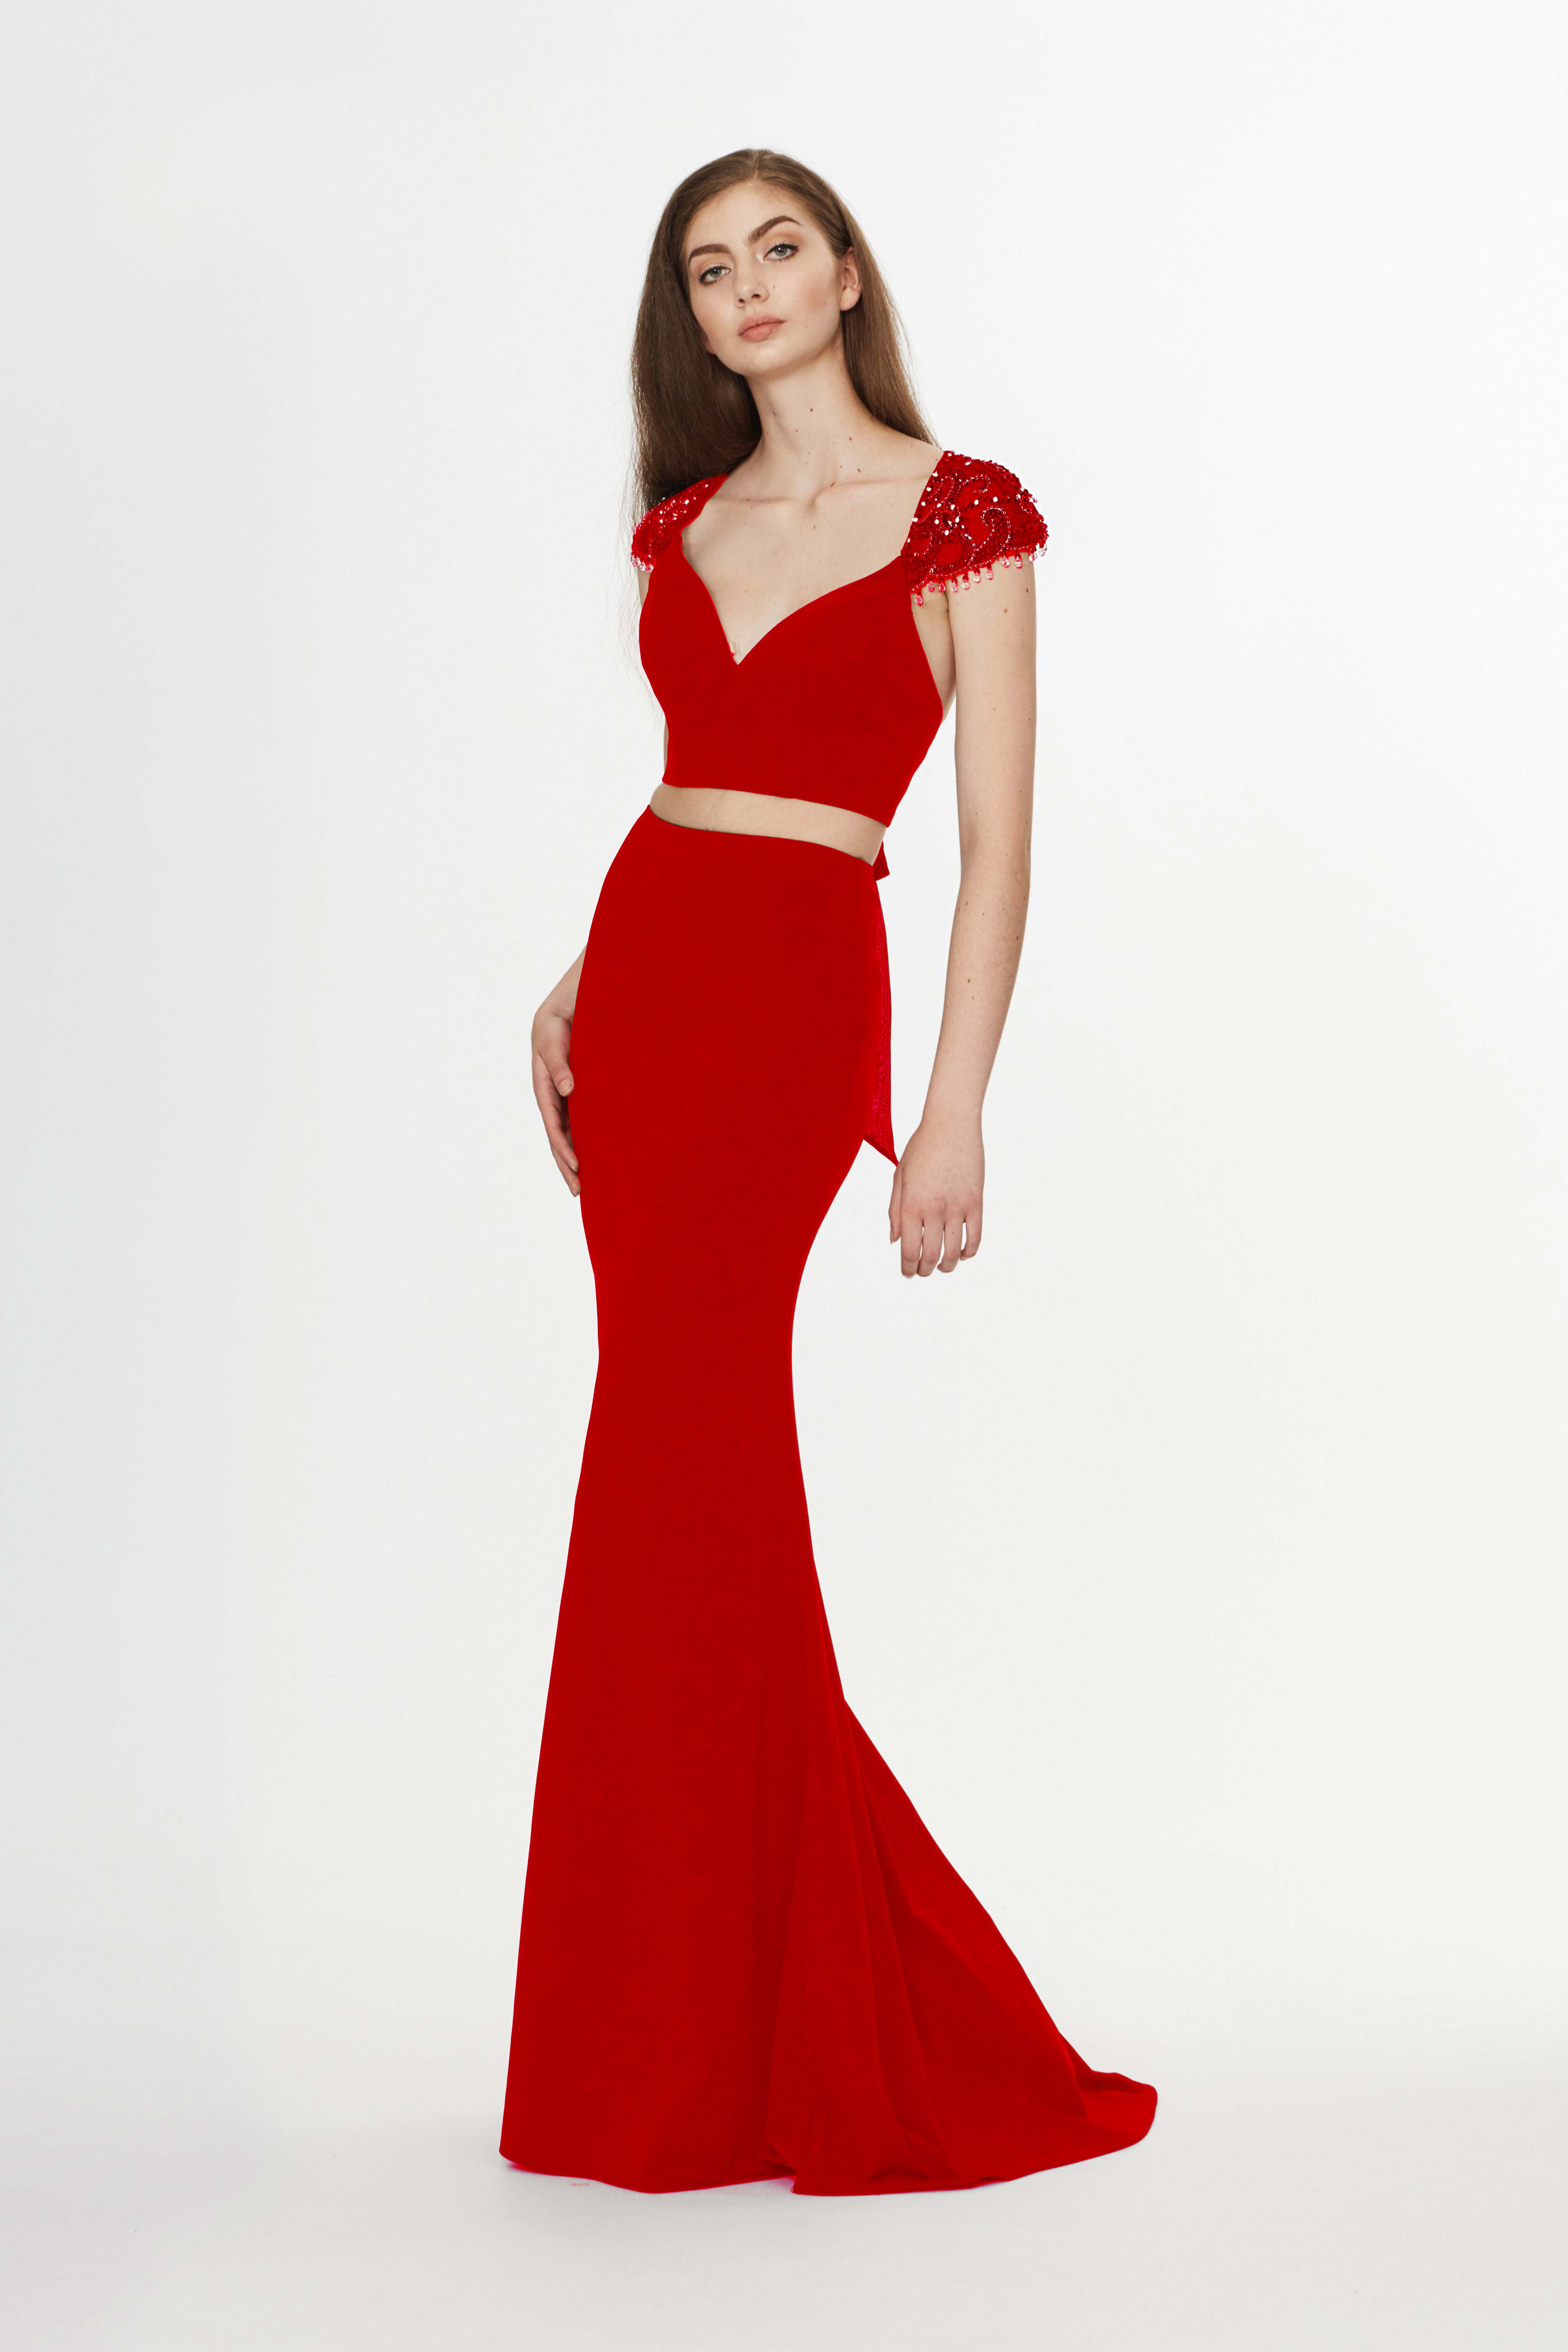 Angela & Alison - 91081 Crystal Embellished Two Piece Gown
